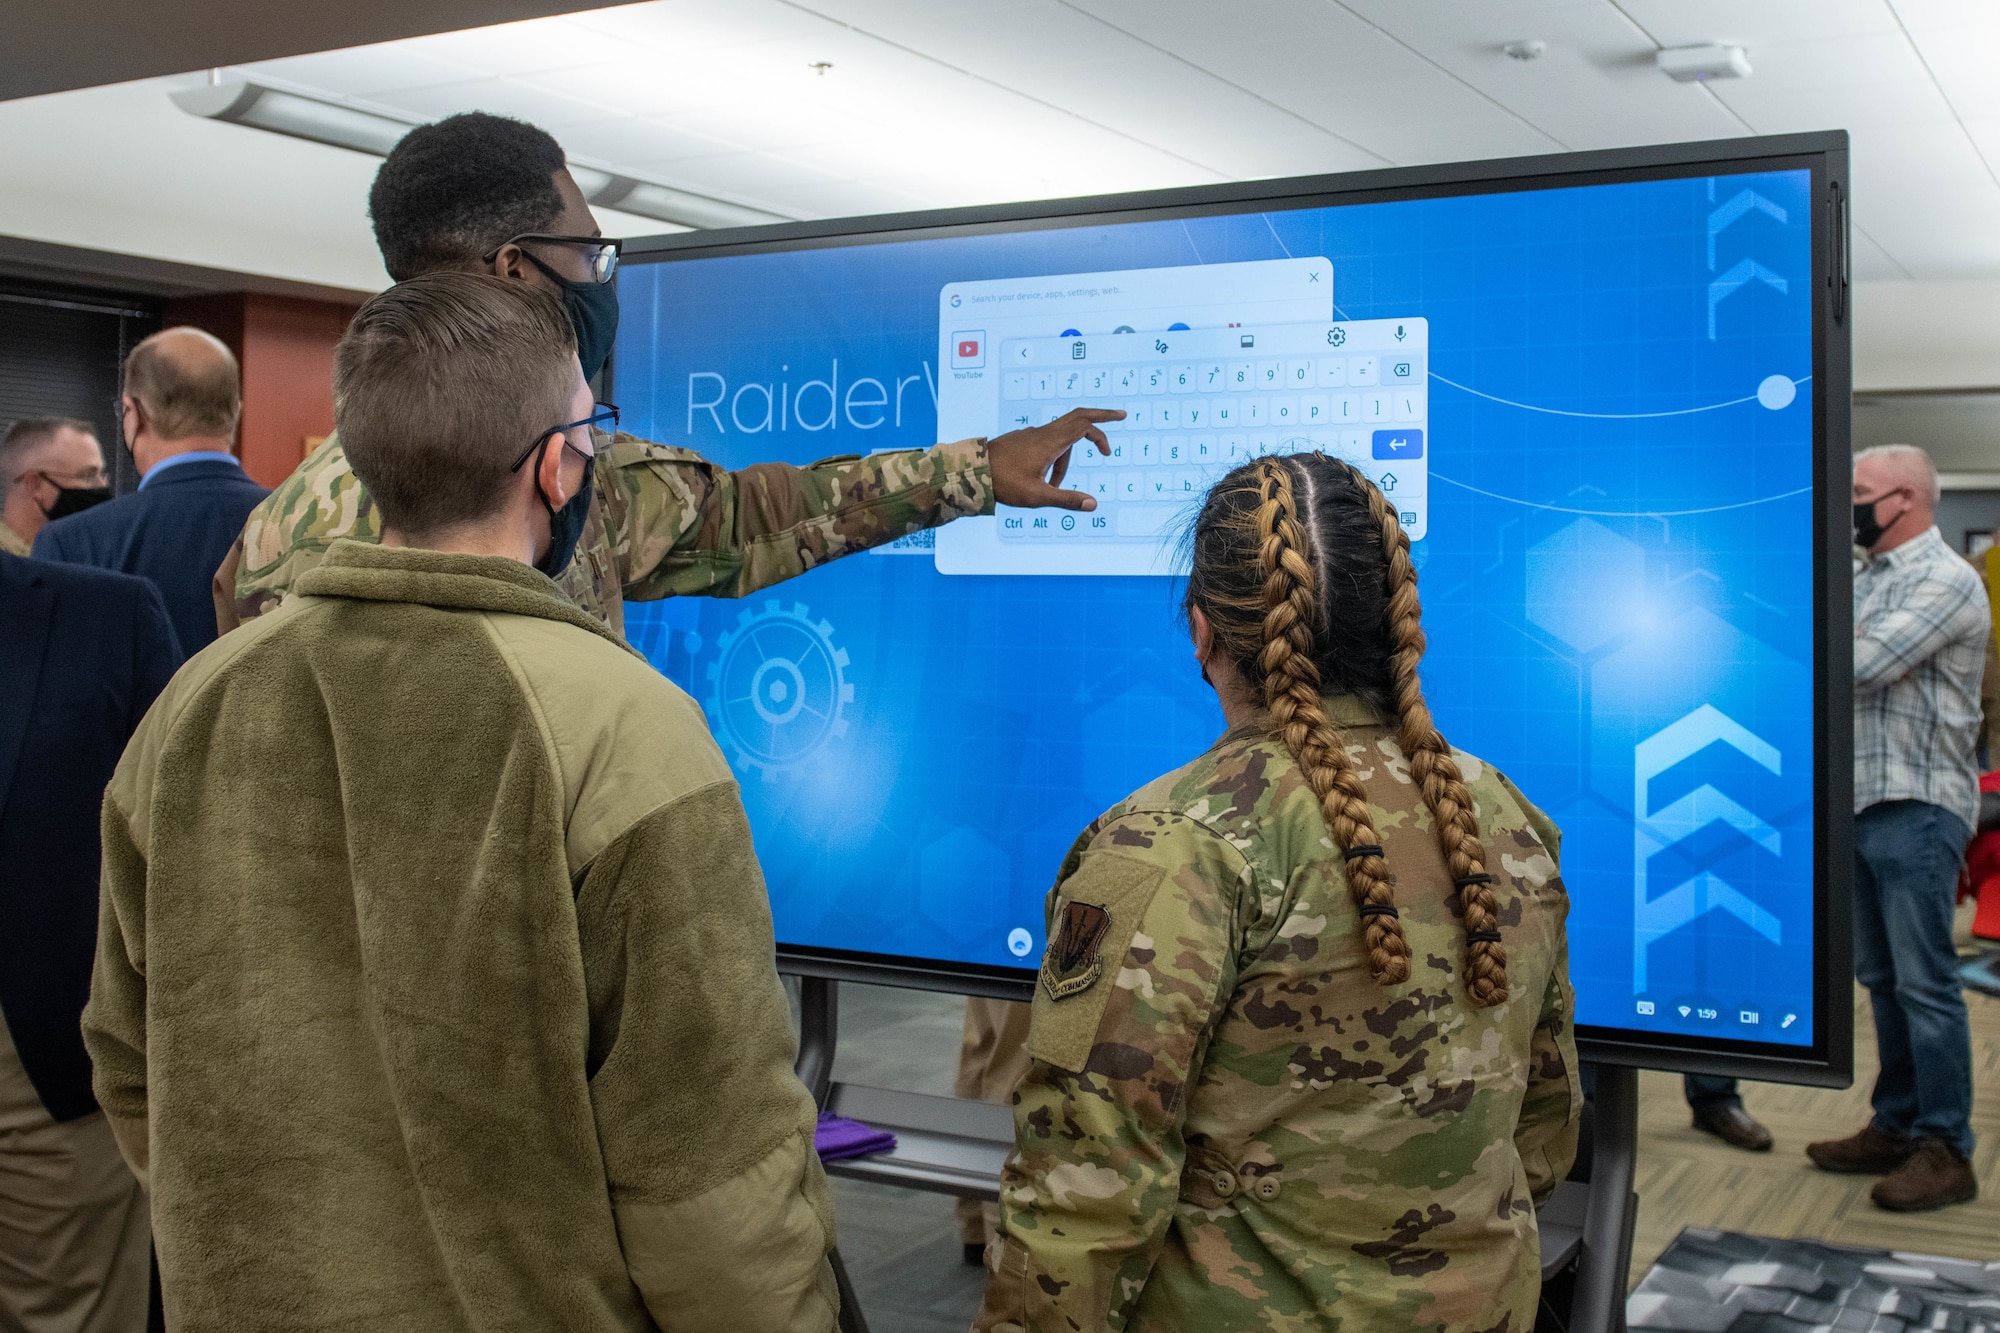 Airmen use a touchscreen during the opening ceremony for Raiderwerx at Ellsworth Air Force Base, S.D., Nov. 19, 2021. Raiderwerx is a public space that is open for the entire Ellsworth community to use and explore 24 hours a day (U.S. Air Force photo by Senior Airman Quentin Marx)